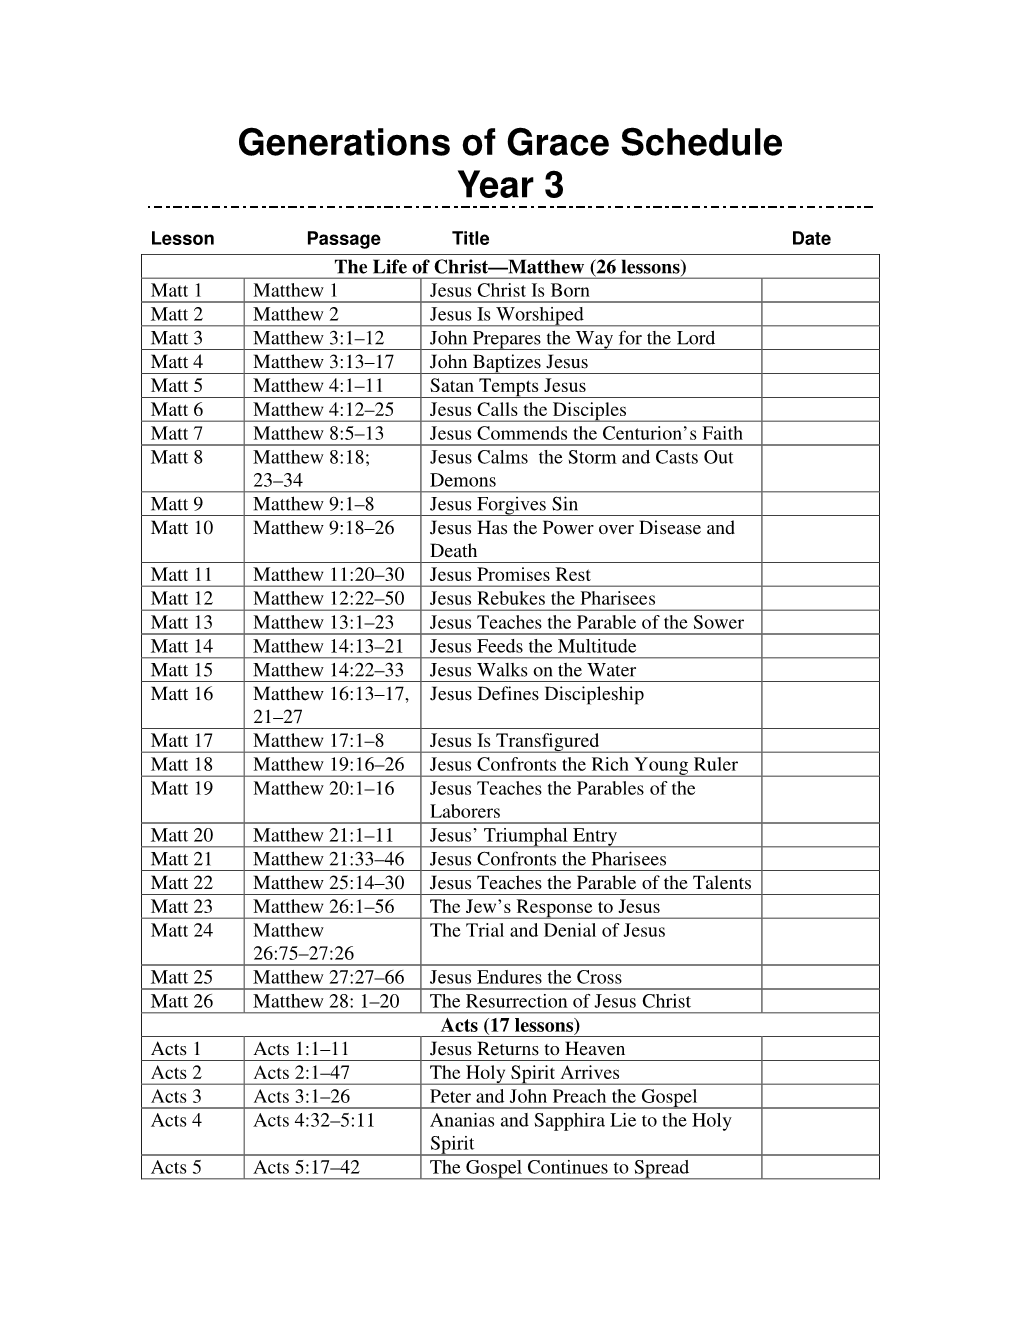 Generations of Grace Schedule Year 3